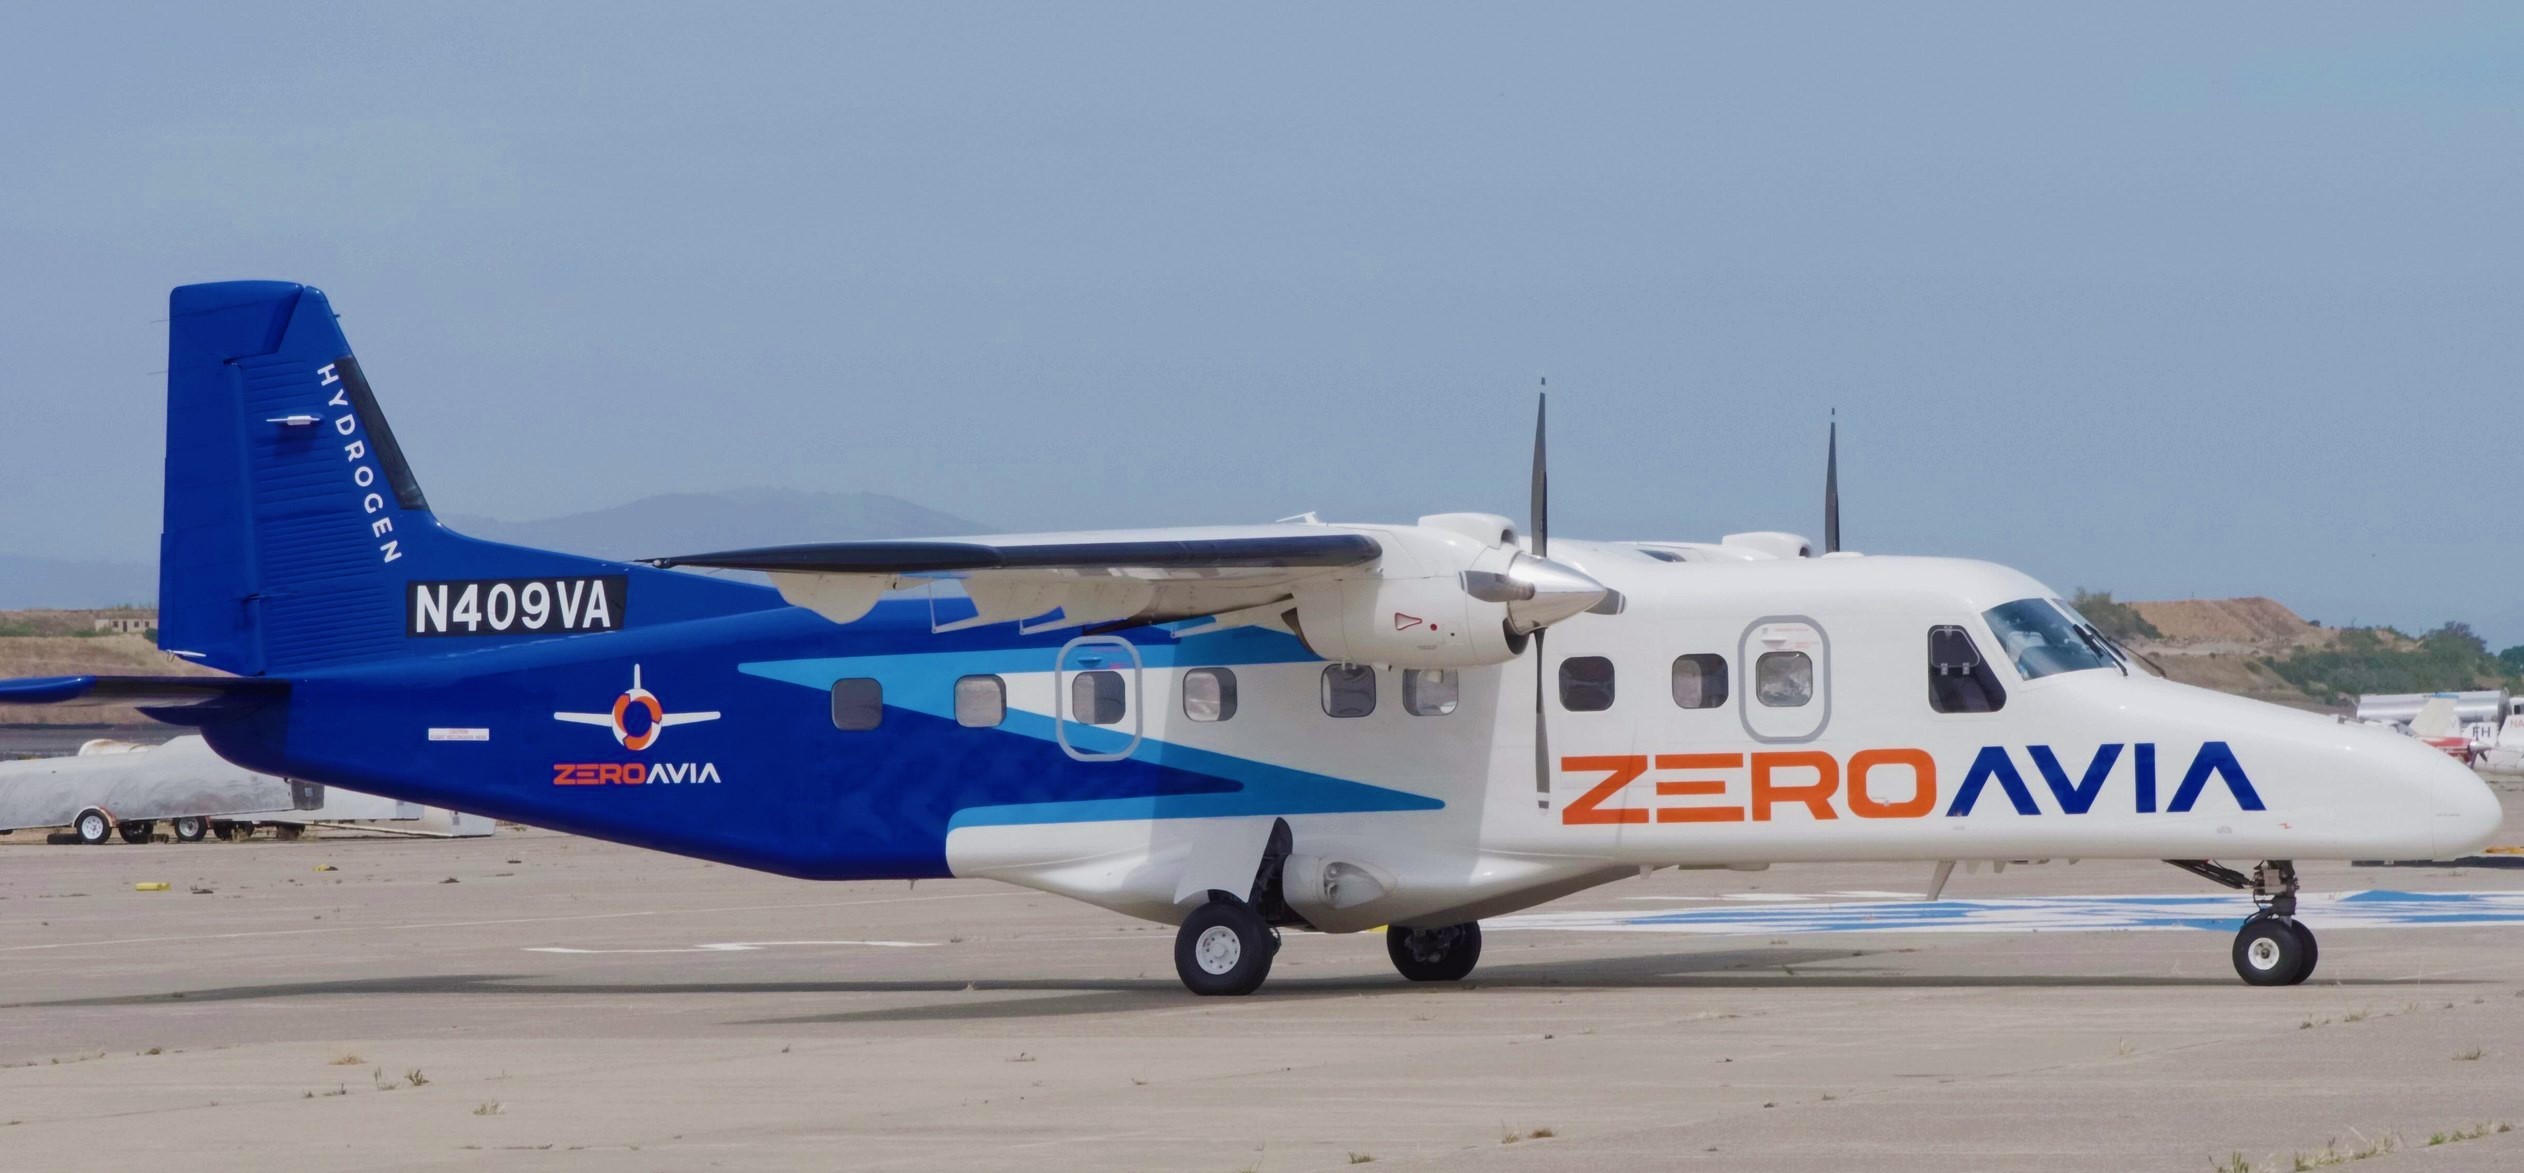 ZeroAvia  has received its second  Dornier 228 aircraft  at  its  headquarters  in  Hollister - California  for it's  ZA600  Powertrains .